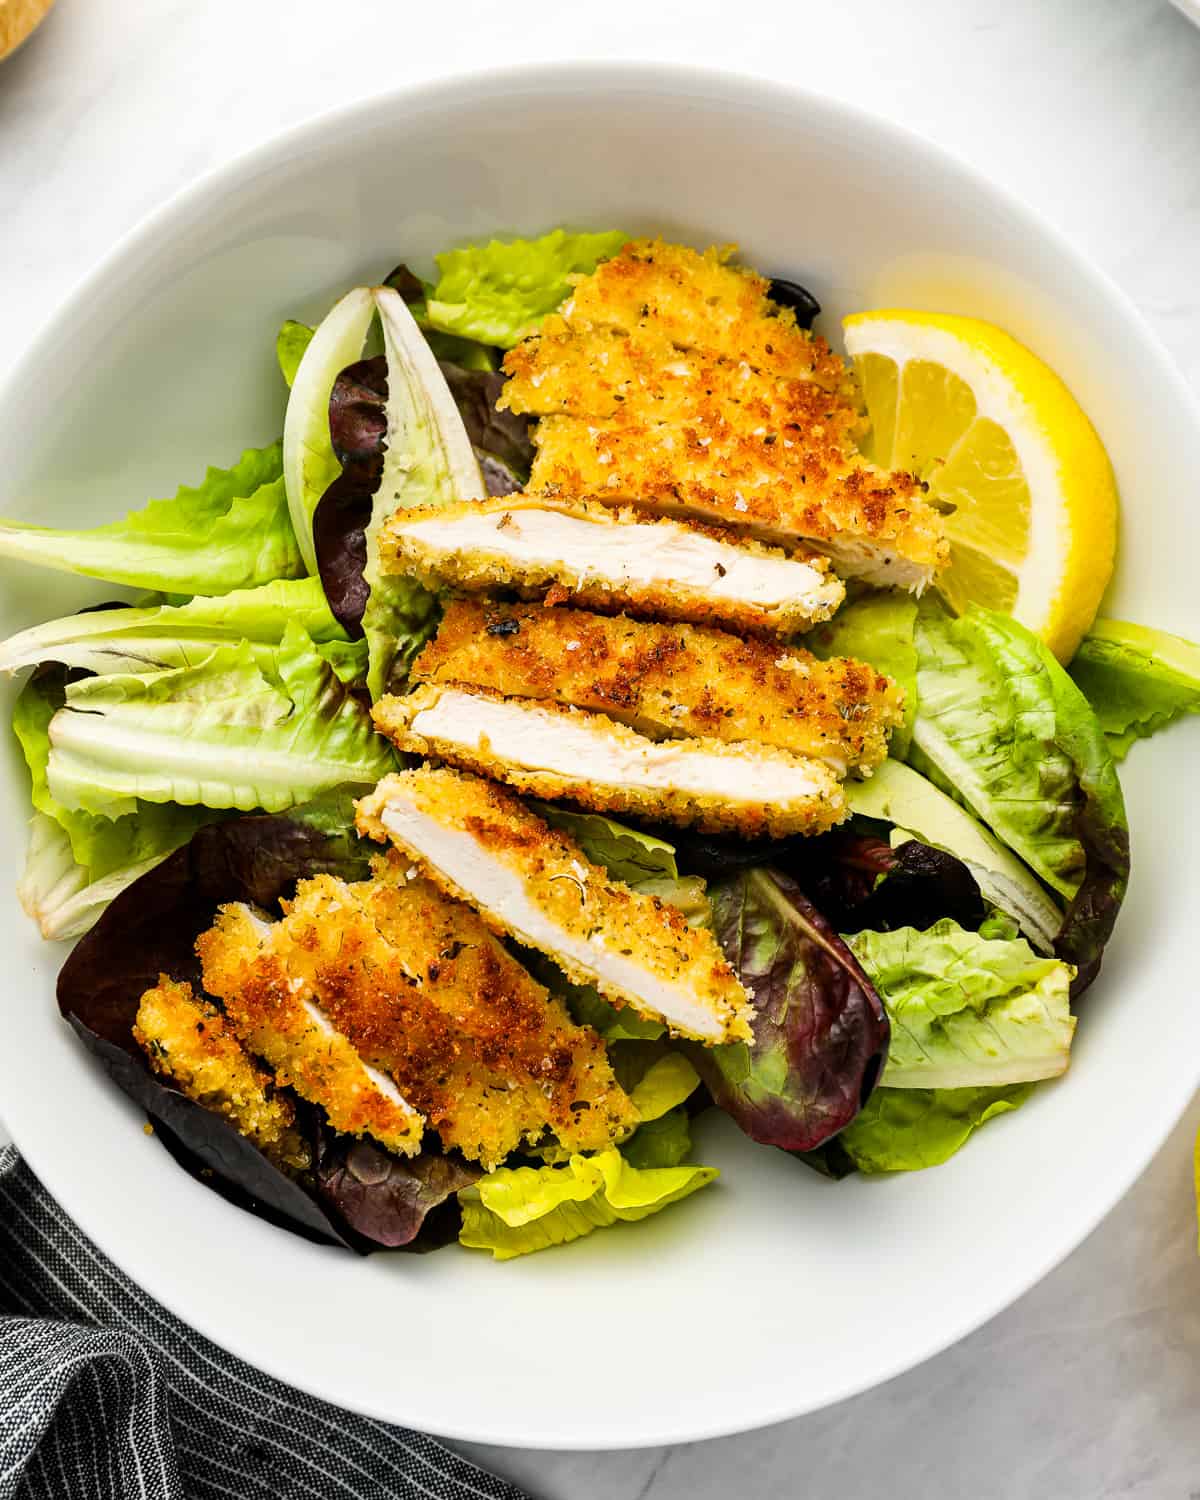 slices of crispy chicken on a bowl of salad.